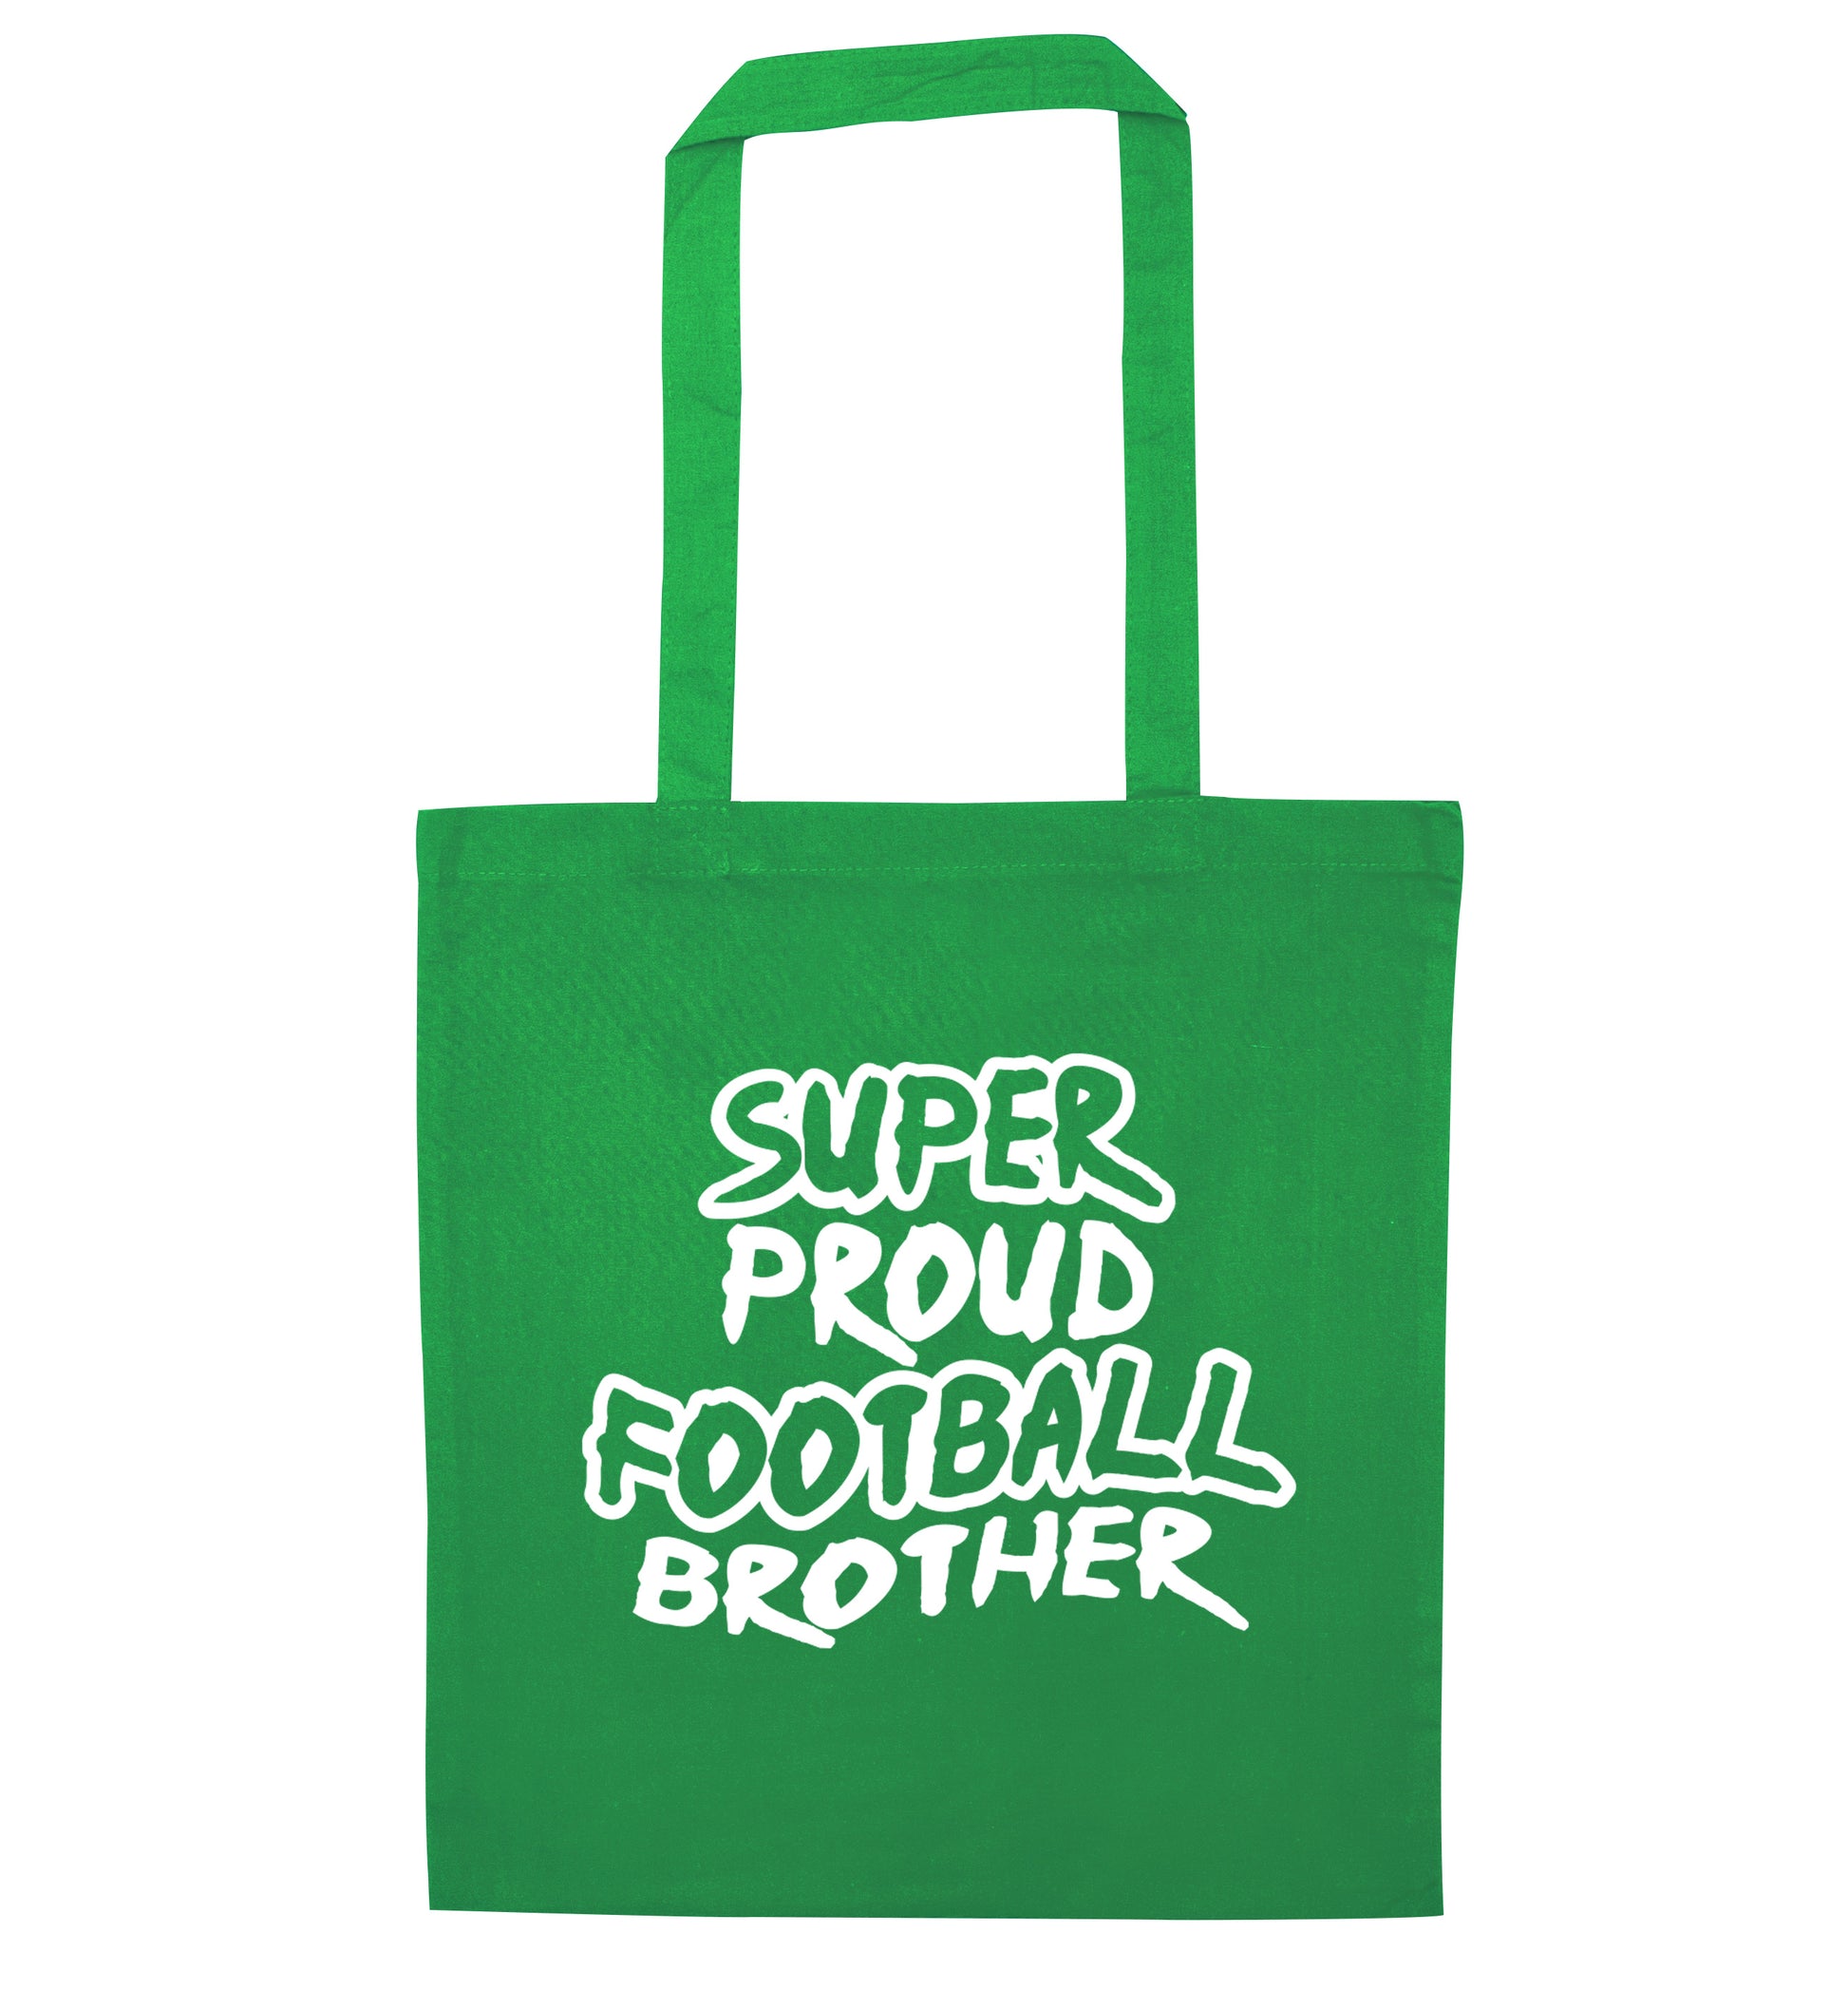 Super proud football brother green tote bag